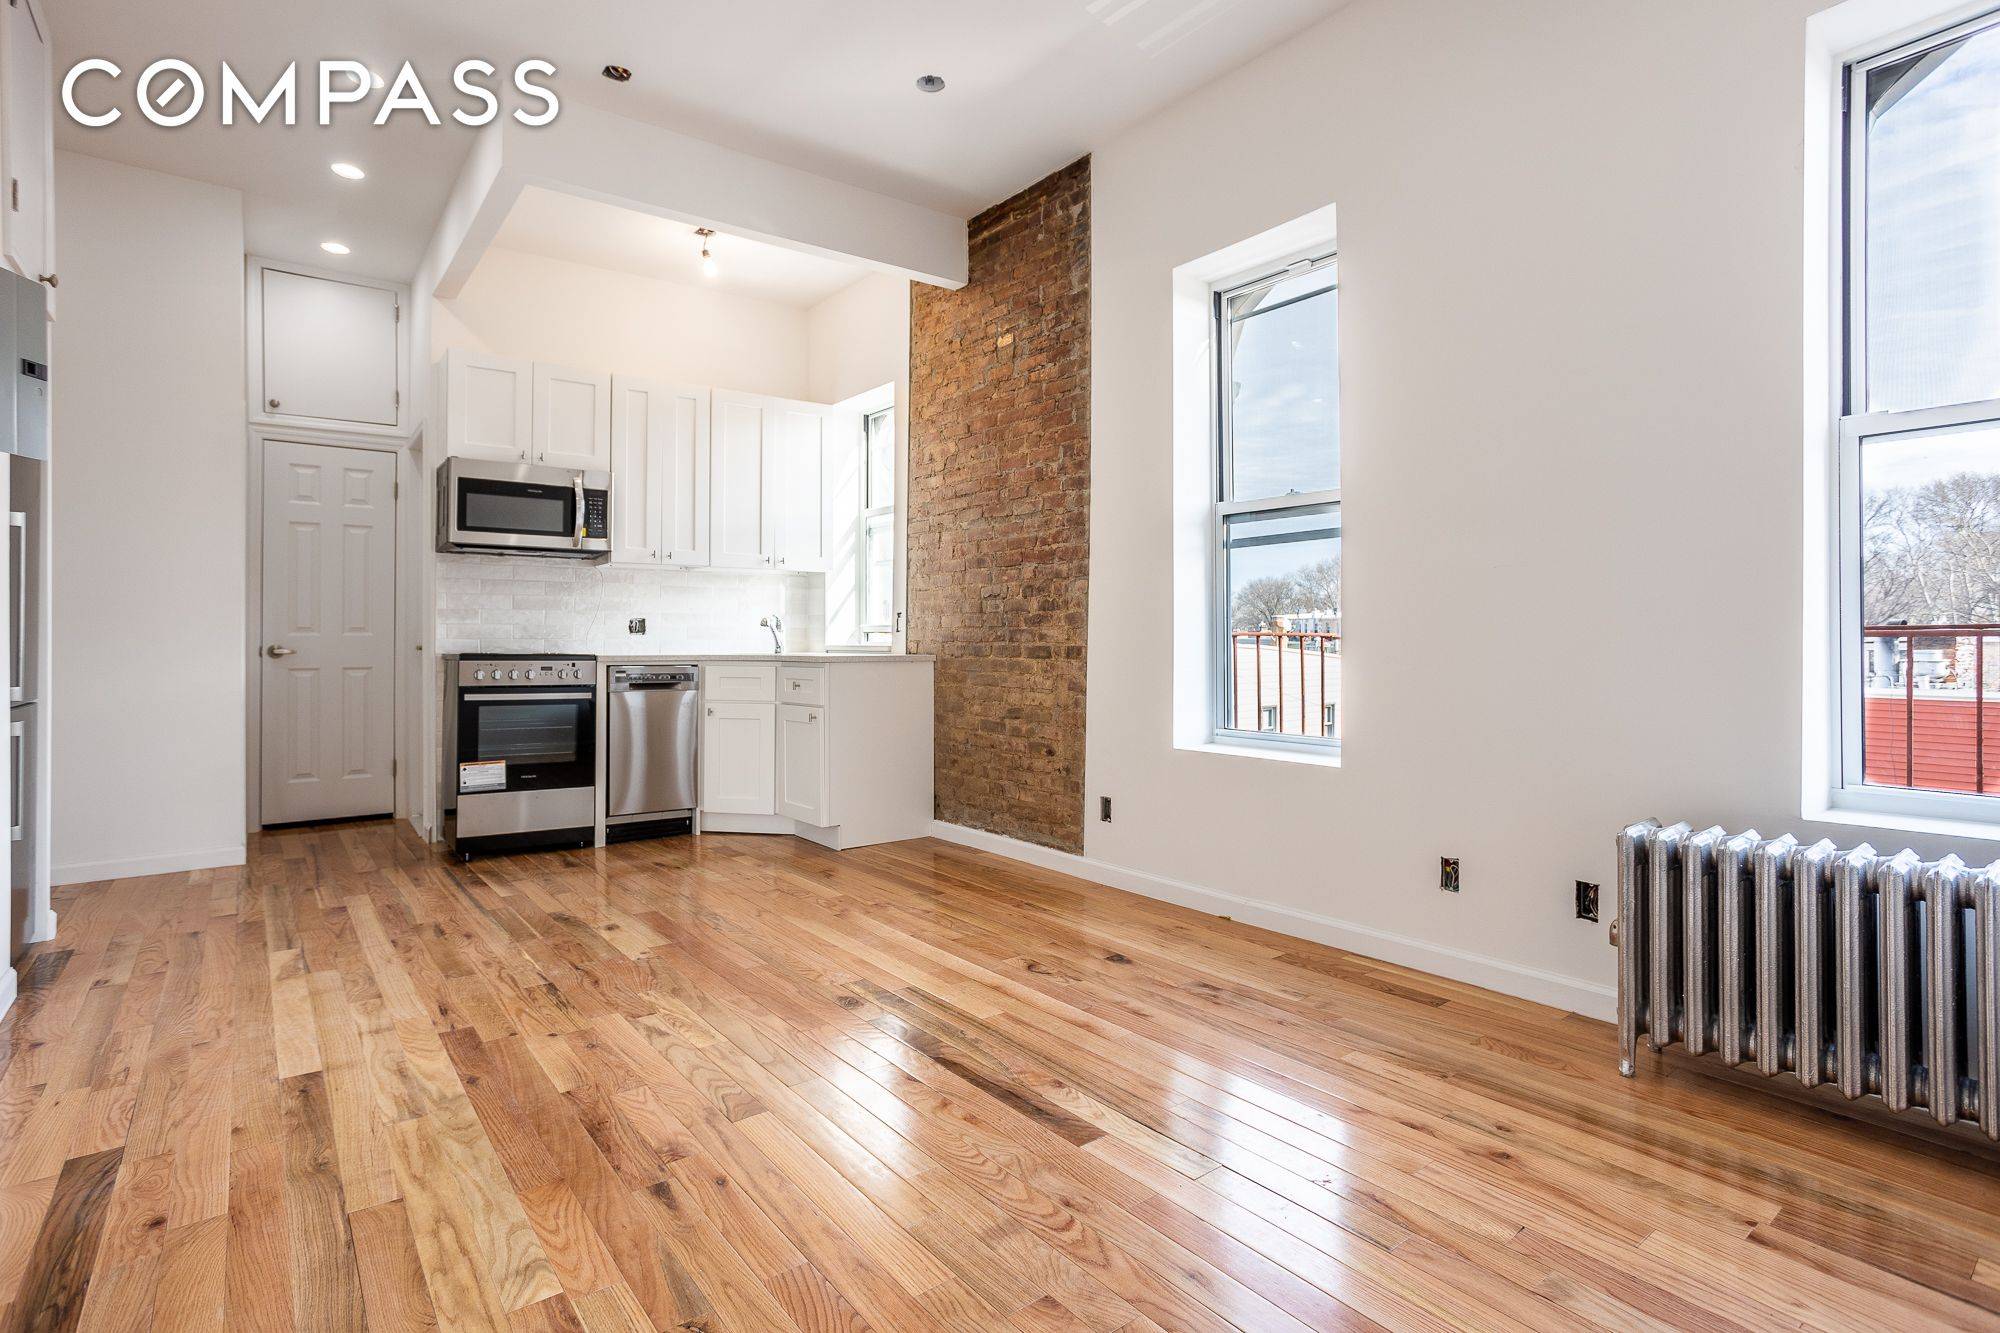 Inside this newly renovated, spacious, sun drenched 3 bedroom, 2 bathroom apartment you ll find beautifully refinished hardwood floors and plenty of windows.